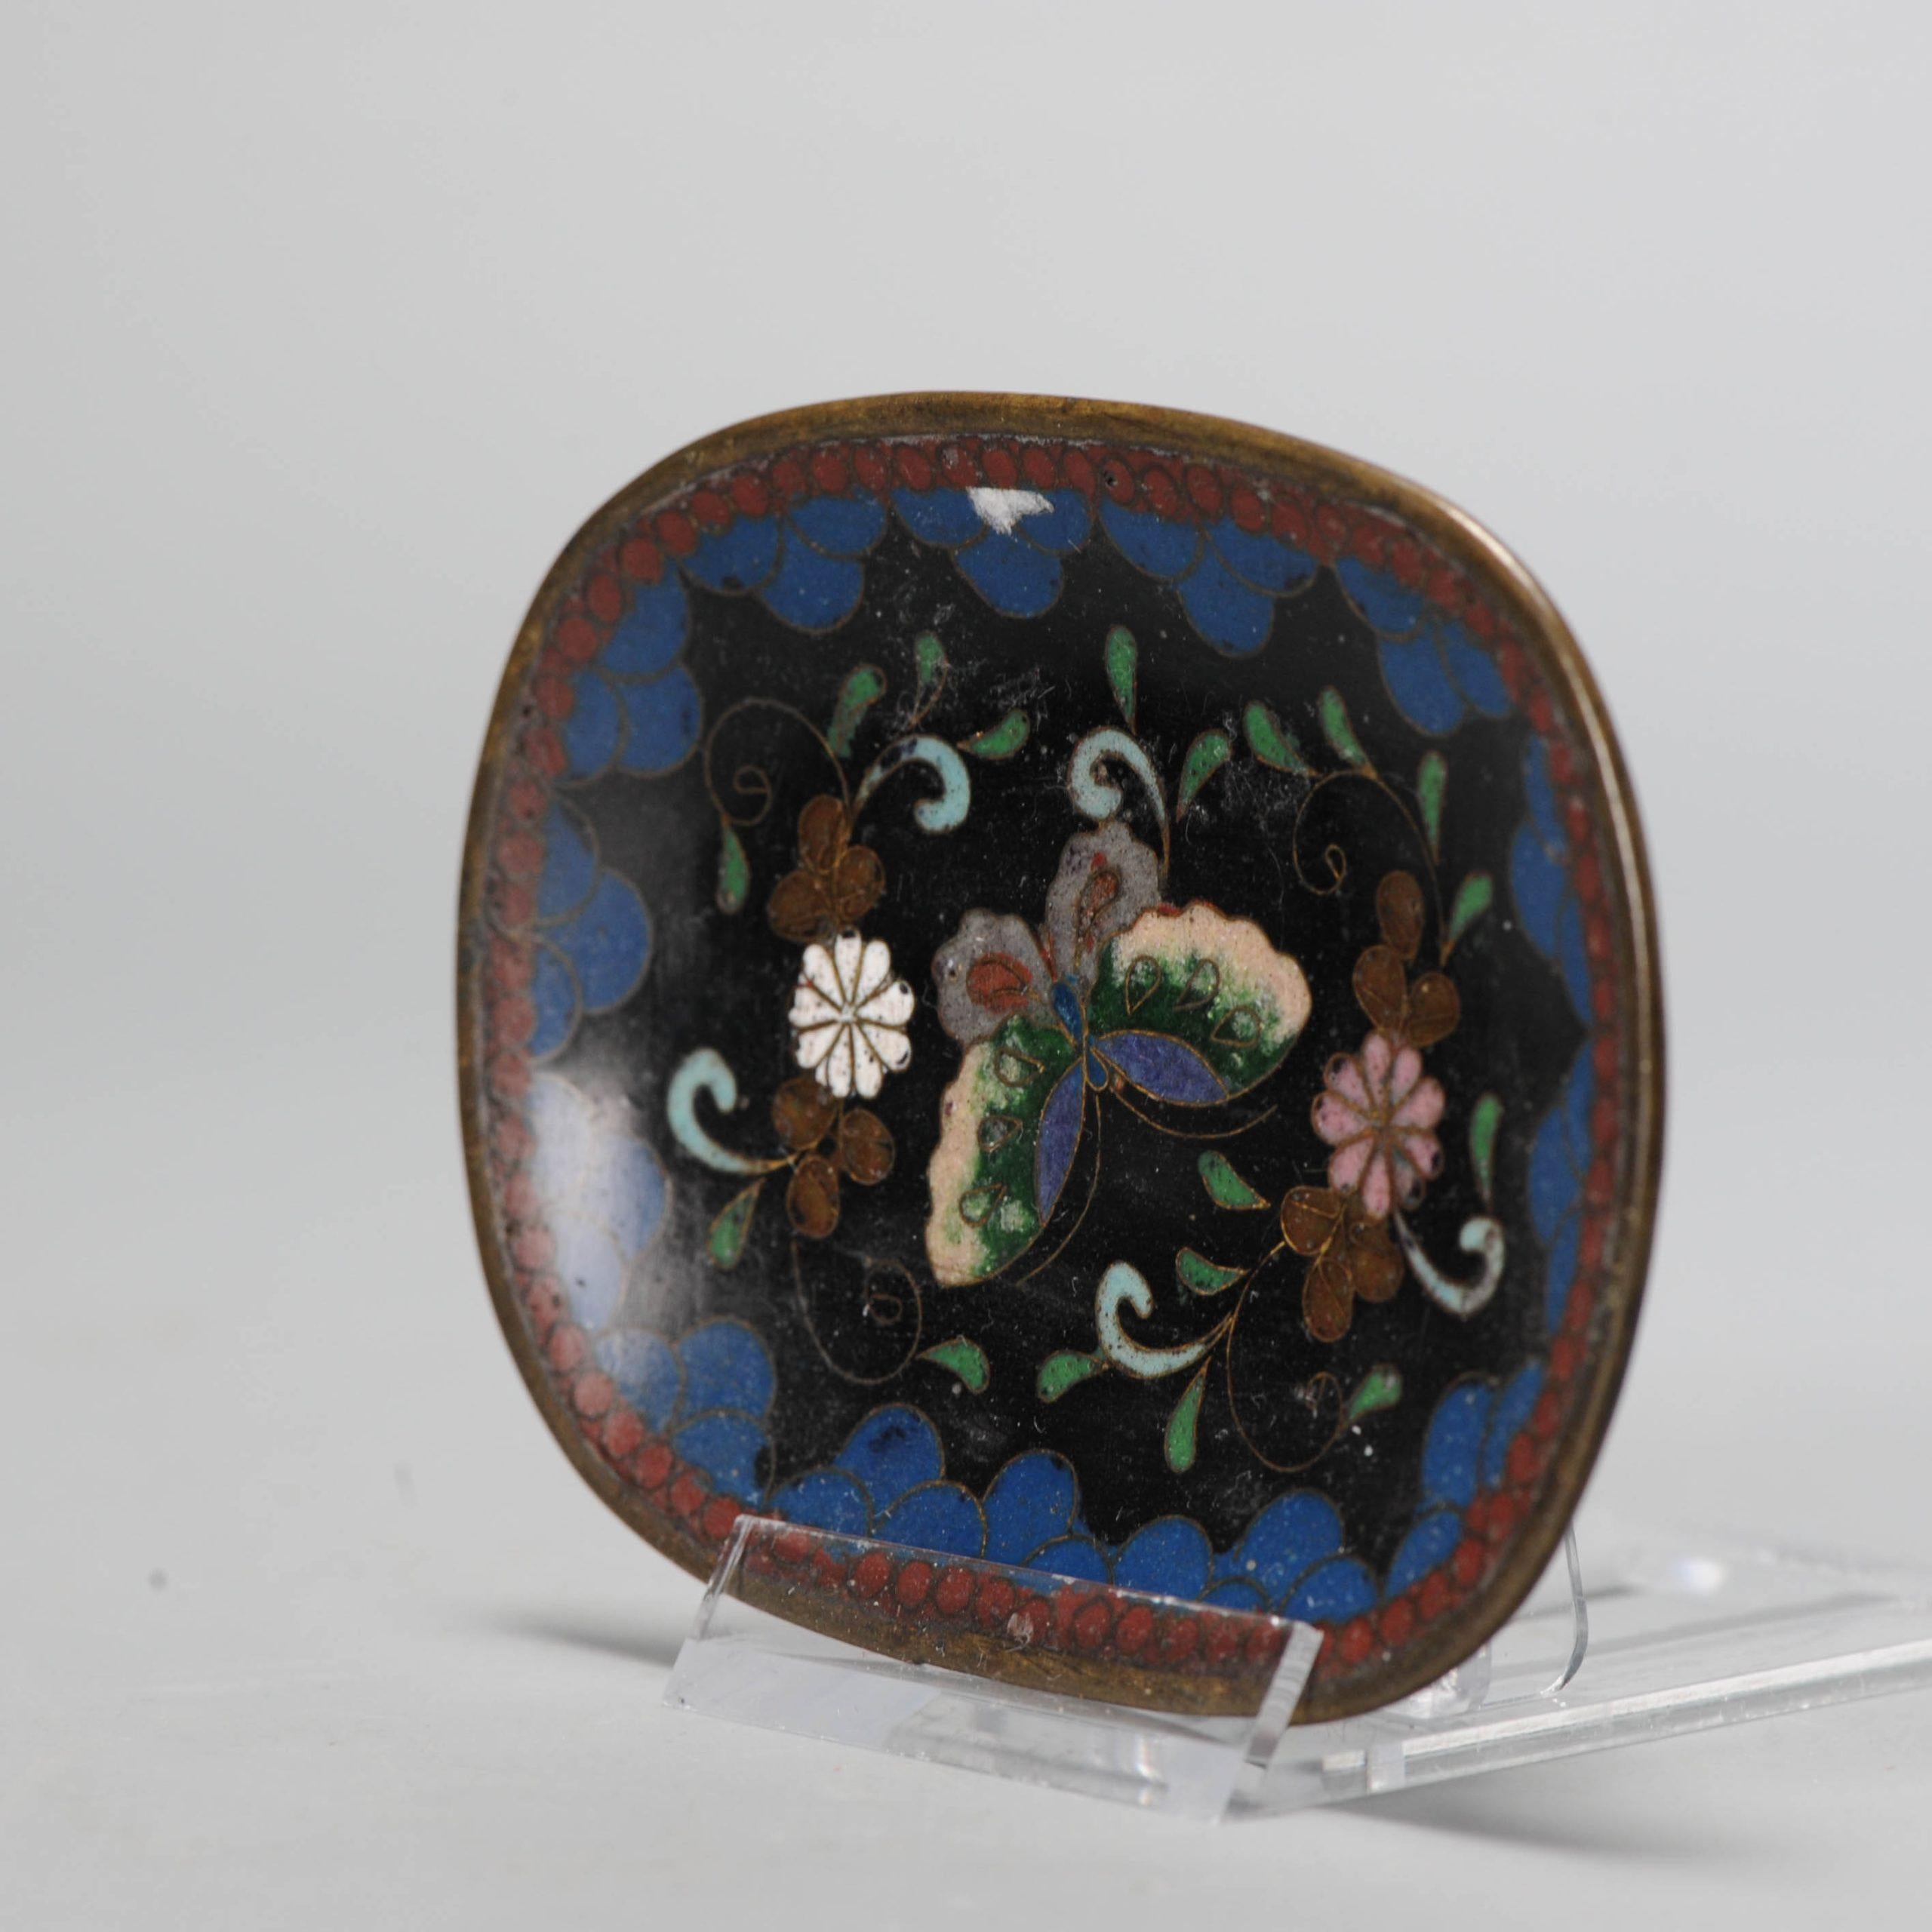 Lovely and beautifully made piece with flowers and butterfly.

Cloisonné is an enamelling technique in which the pattern is formed by wires soldered to the surface of the object to be decorated, which is usually made from copper, forming cells or